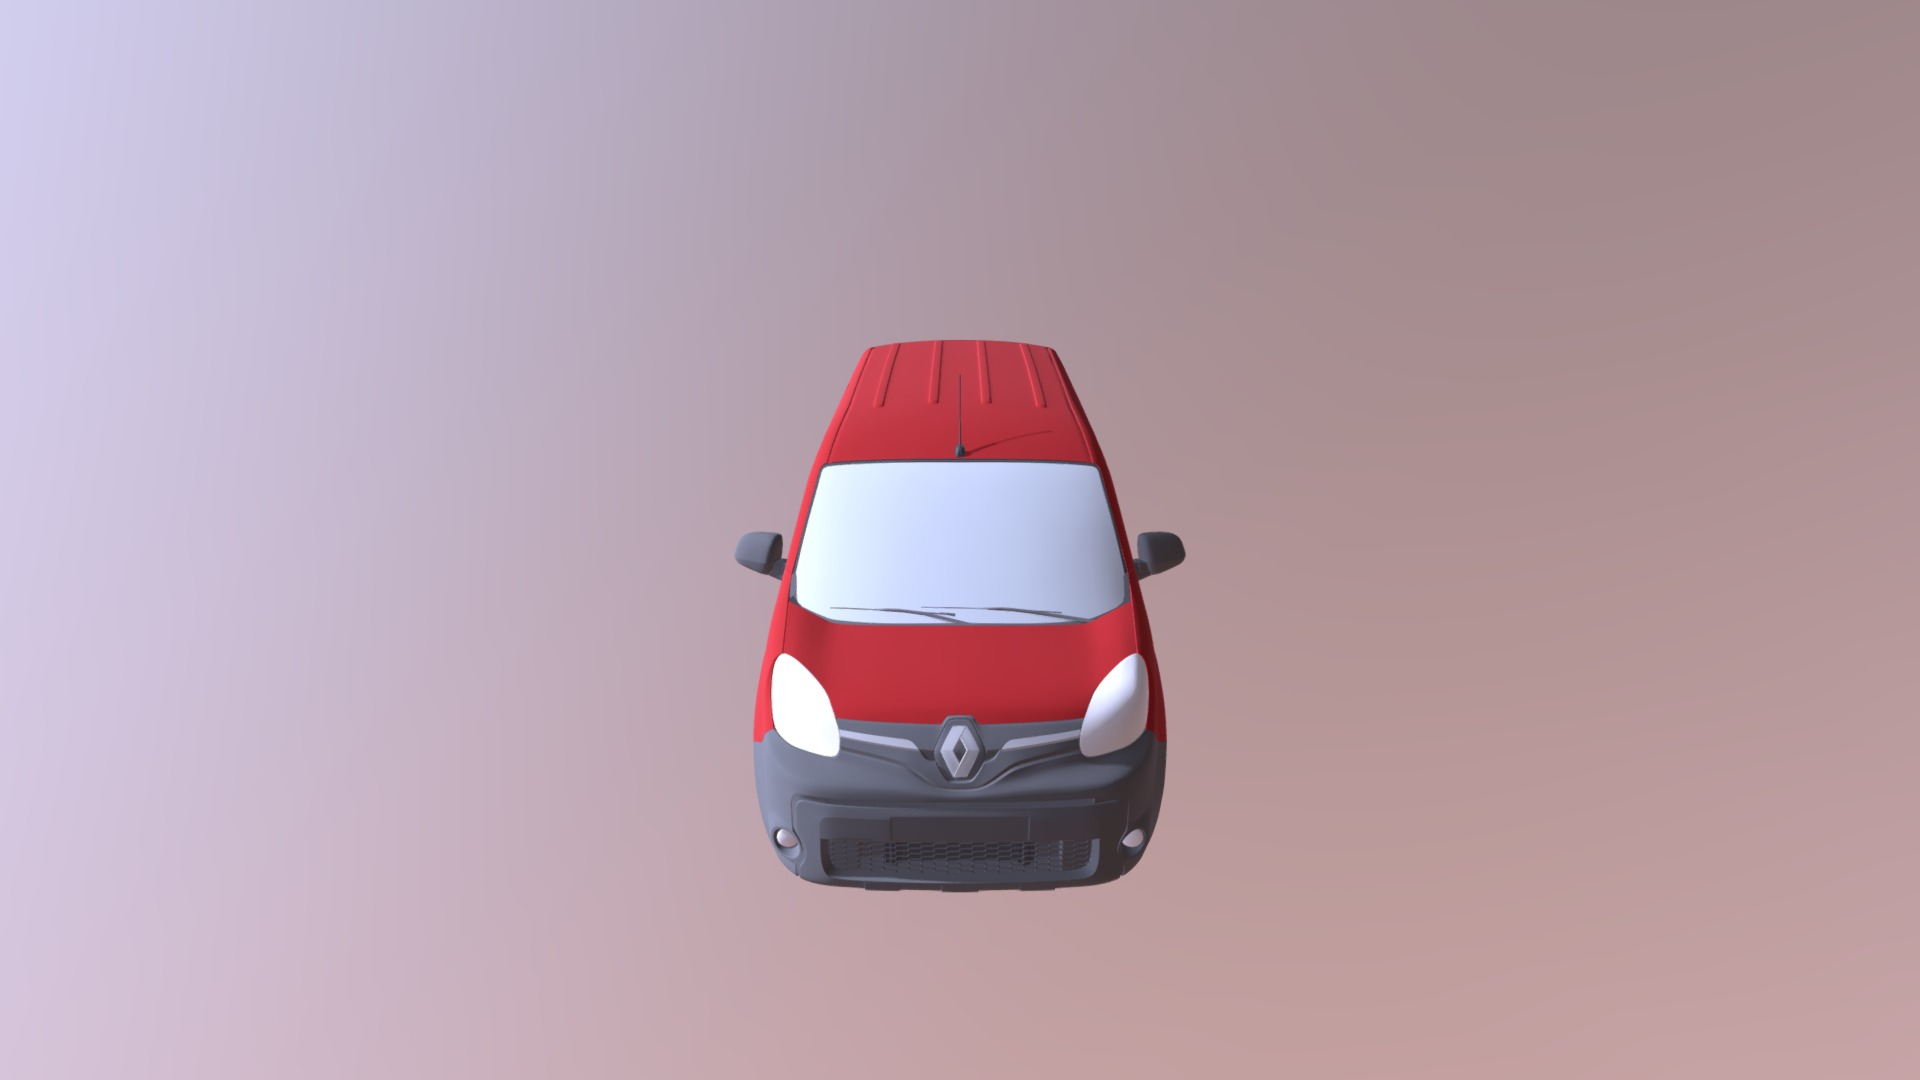 3D model Renault Kangoo Maxi Van 2017 L3 2017 Fbx - This is a 3D model of the Renault Kangoo Maxi Van 2017 L3 2017 Fbx. The 3D model is about a red car with a white top.